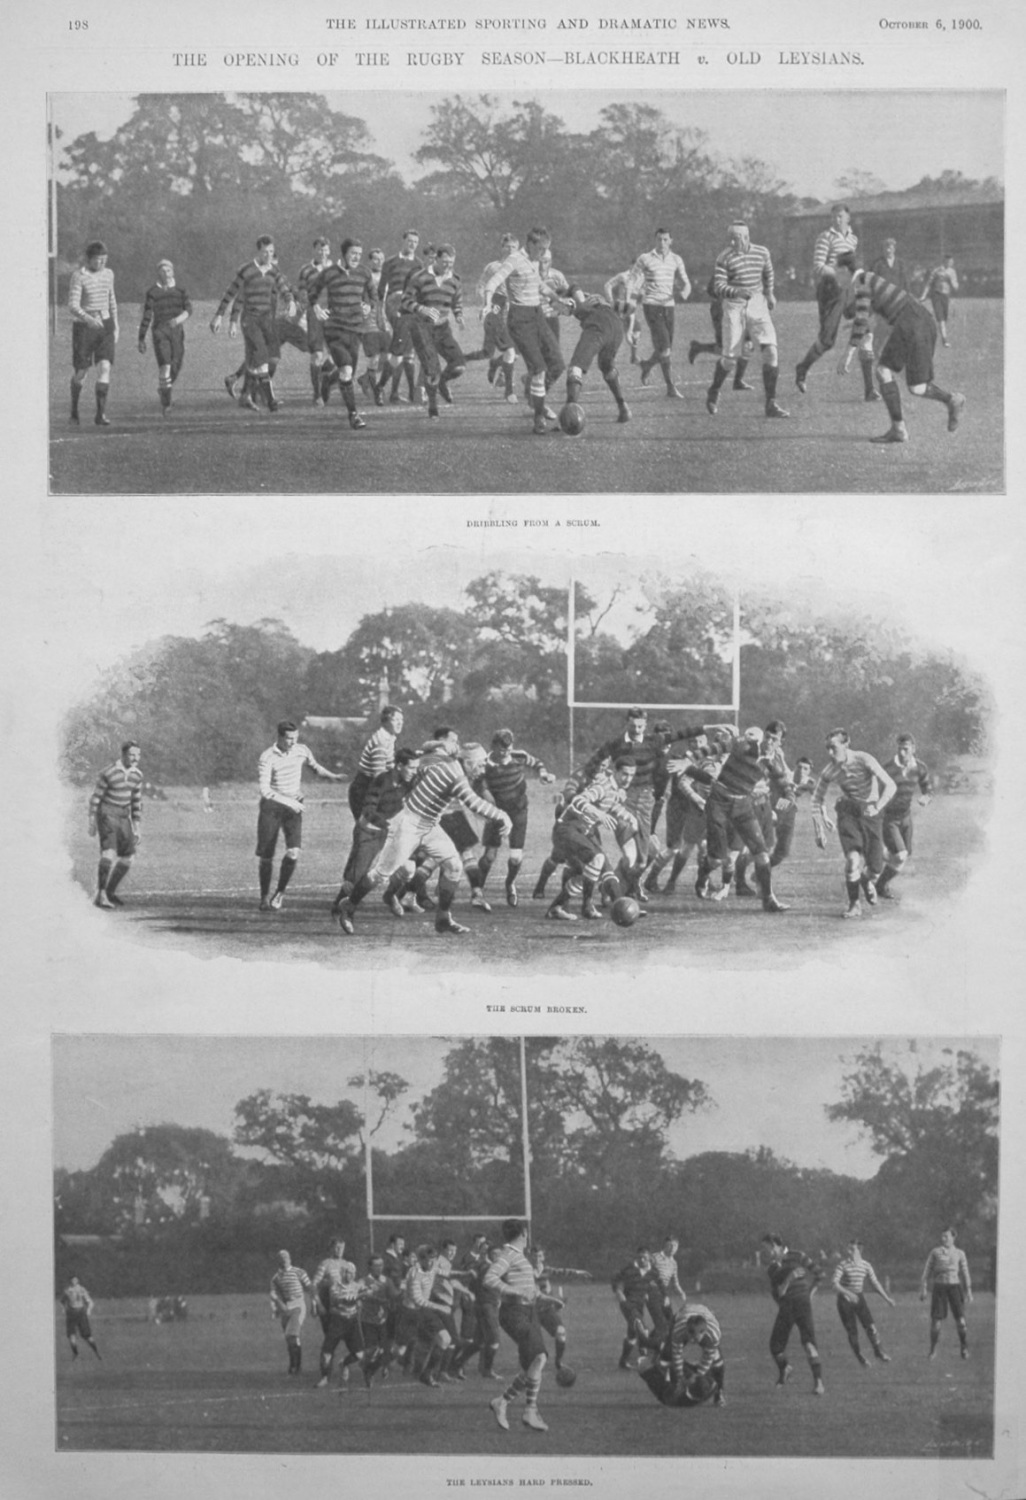 The Opening of the Rugby Season - Blackheath v. Old Leysians. 1900